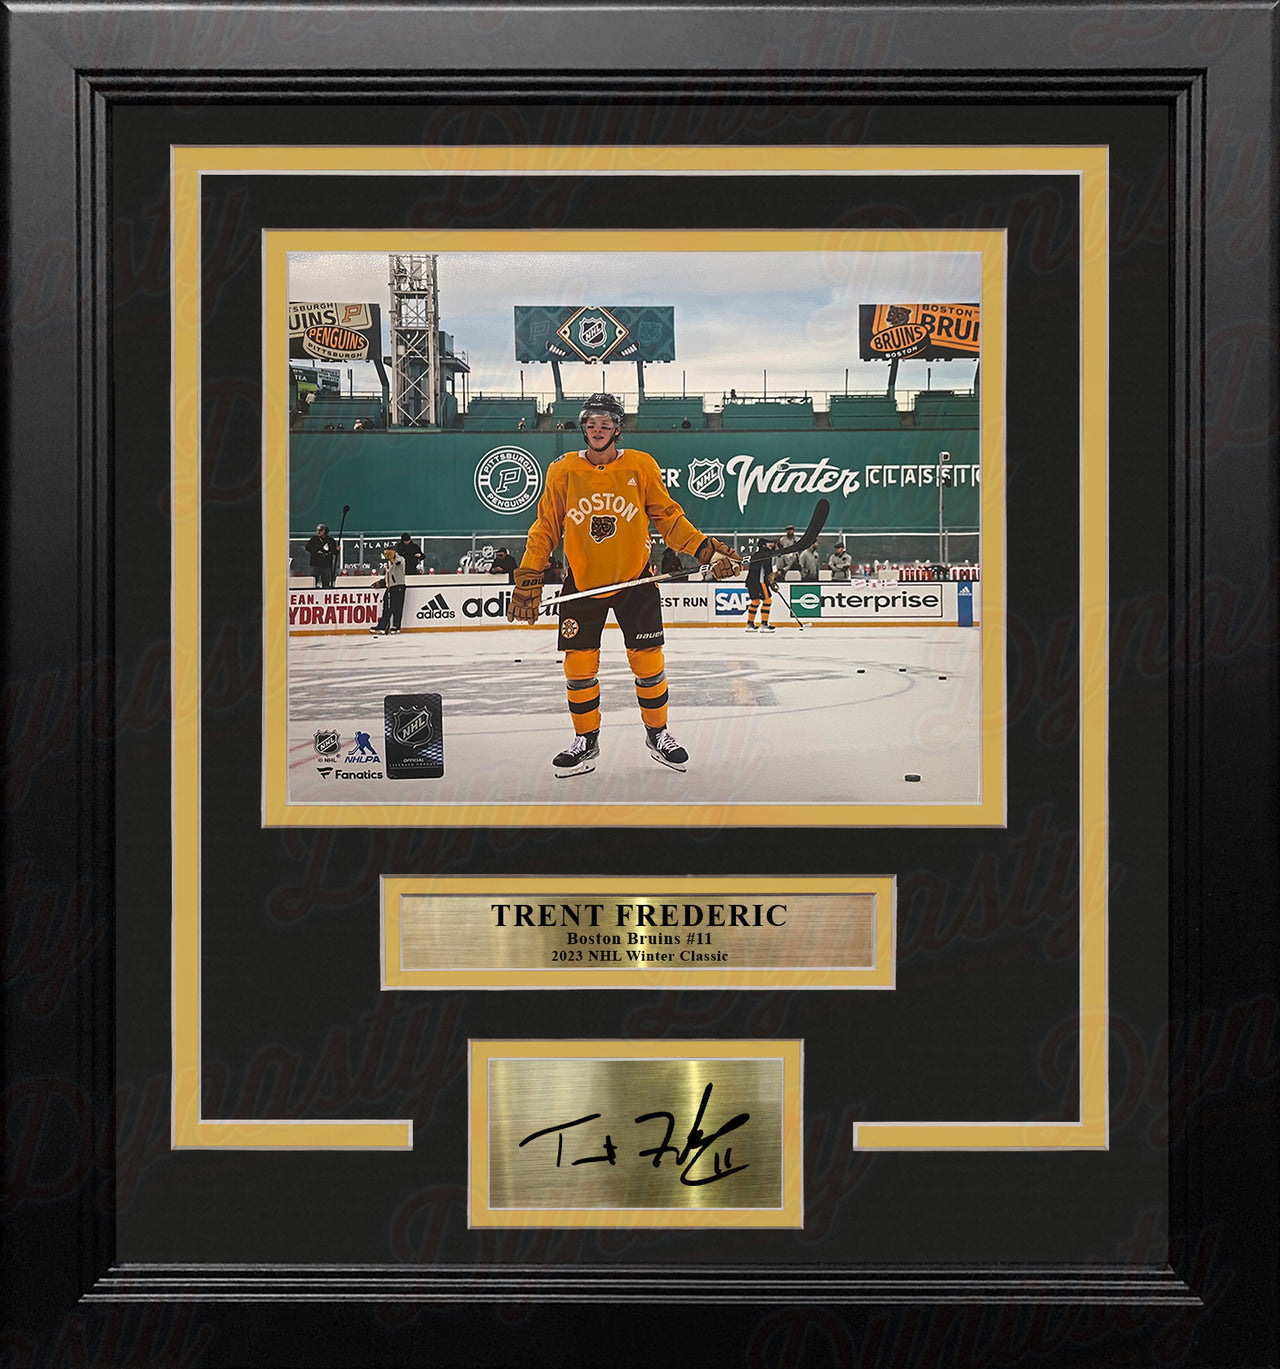 Trent Frederic Winter Classic Boston Bruins 11" x 14" Framed Hockey Photo with Engraved Autograph